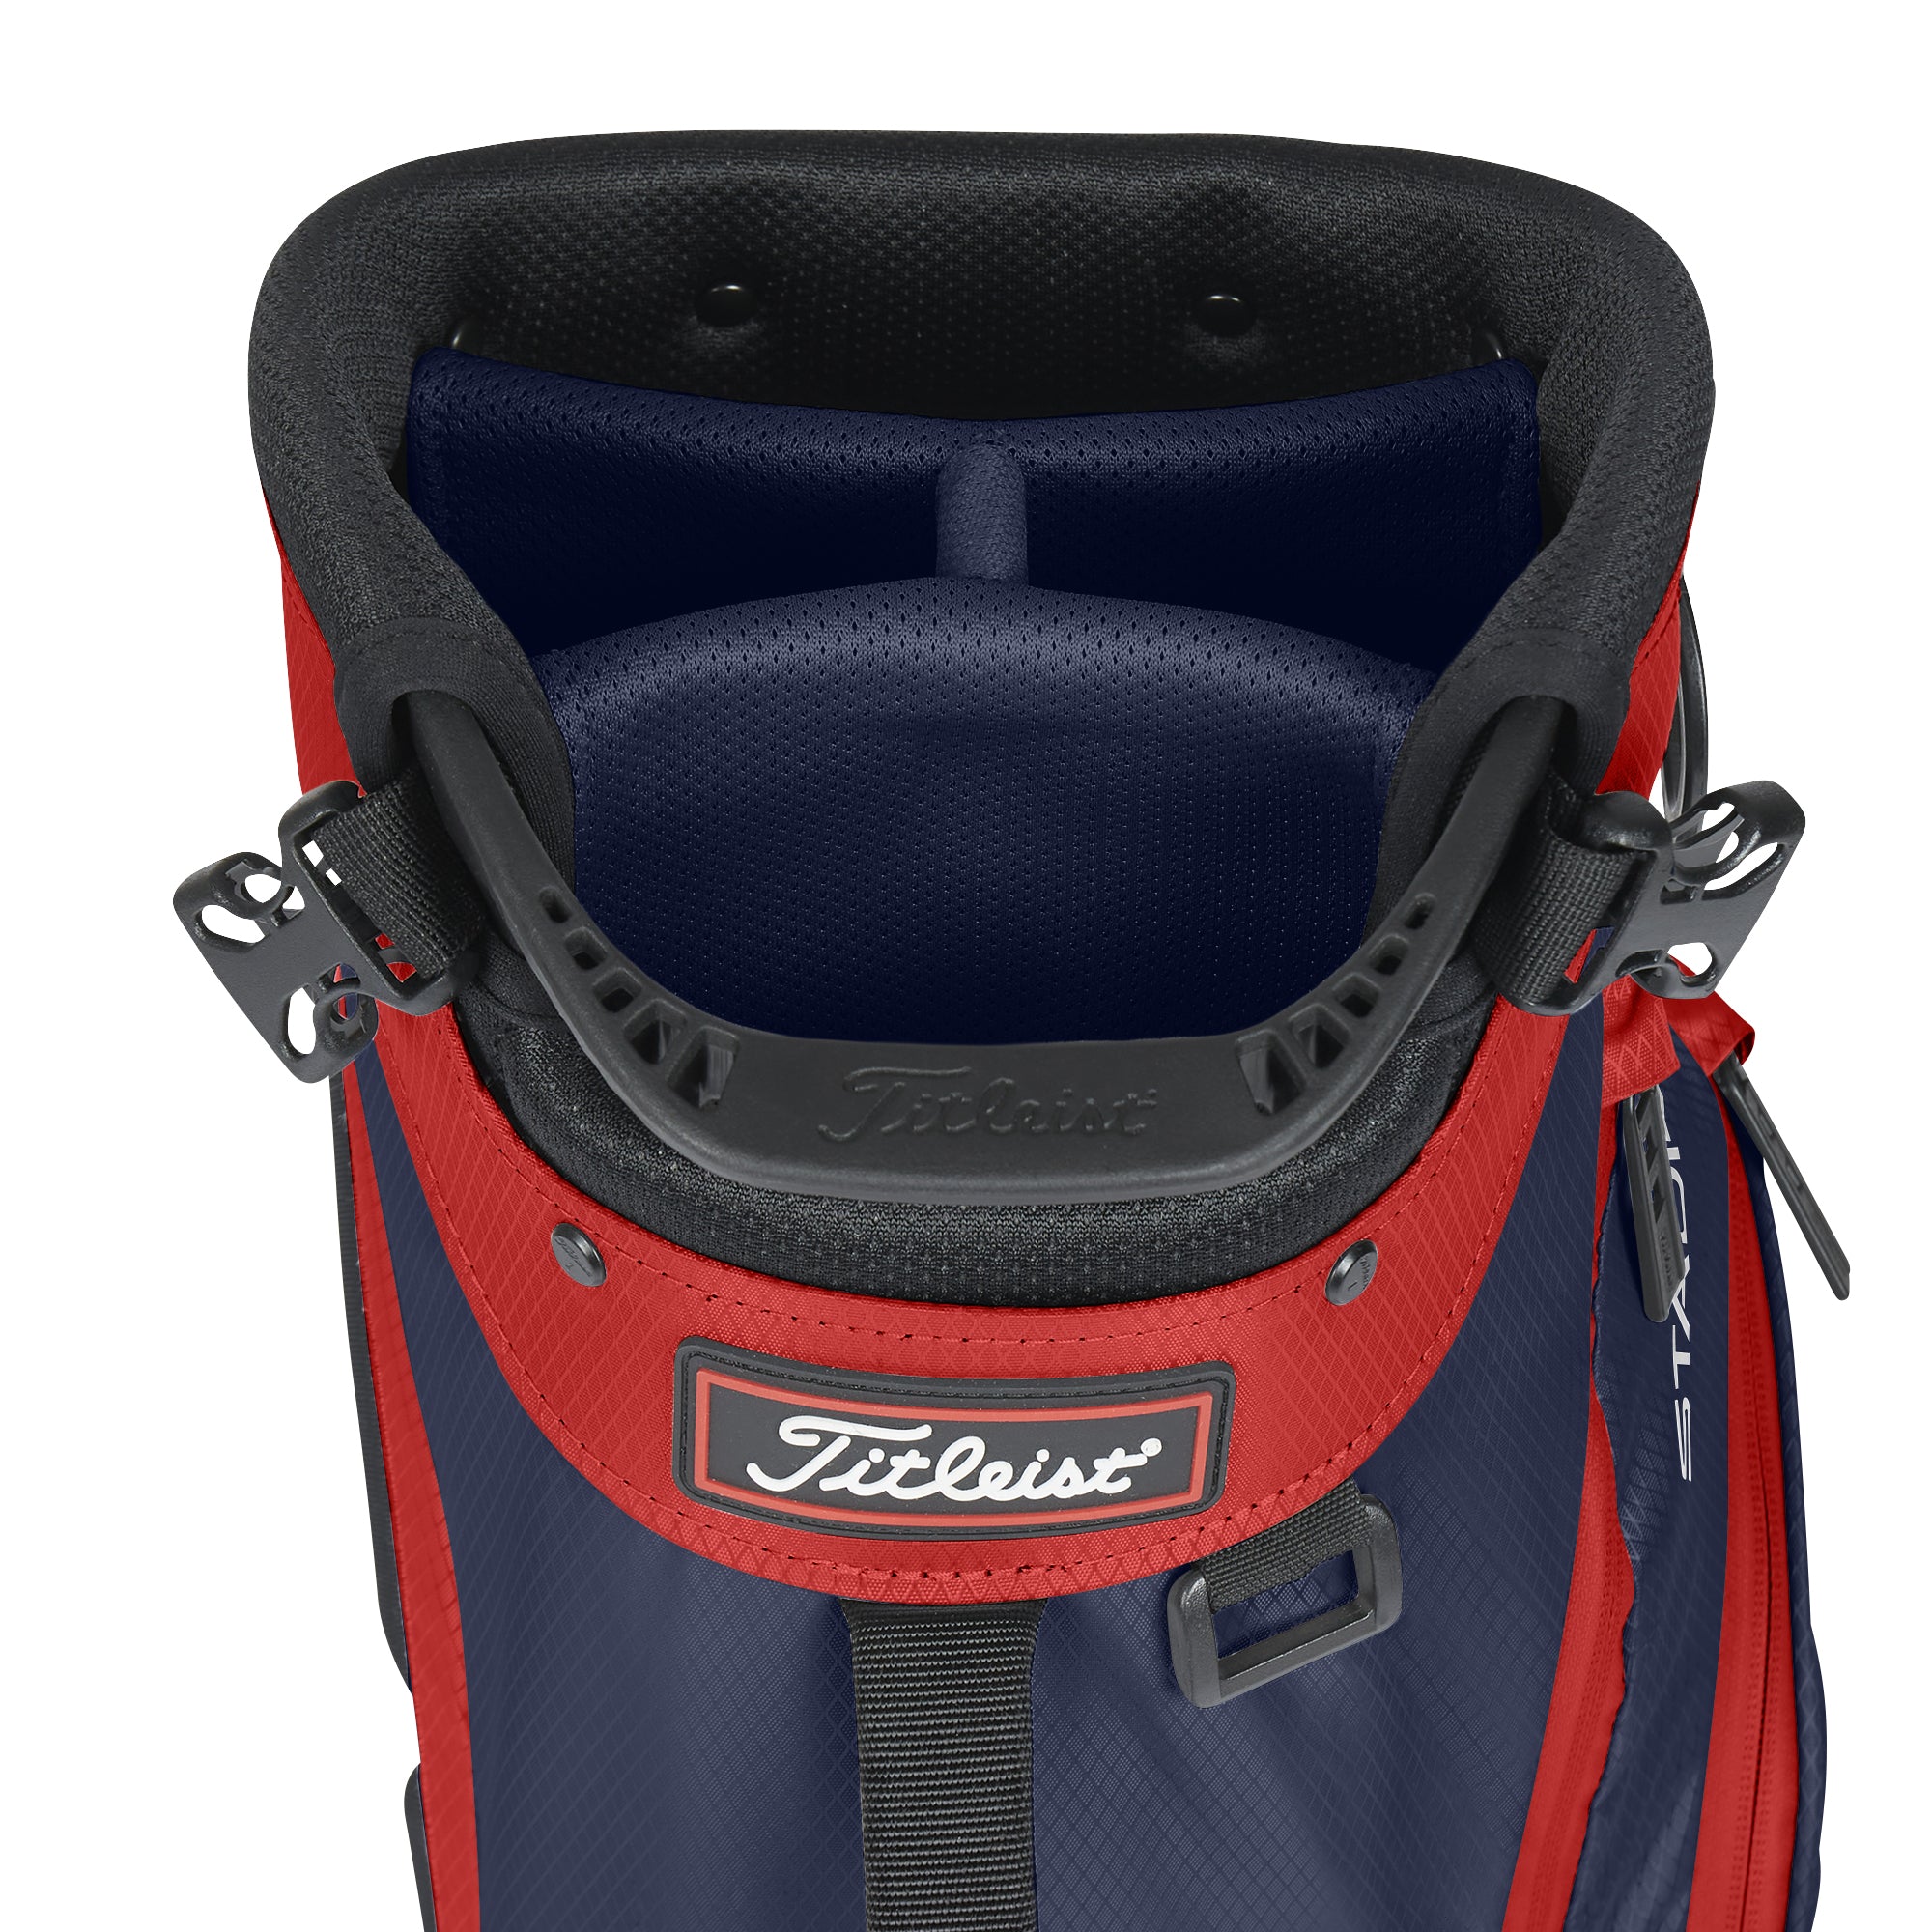 titleist-players-4-stadry-stand-golf-bag-tb23sx2-416-navy-white-red-416